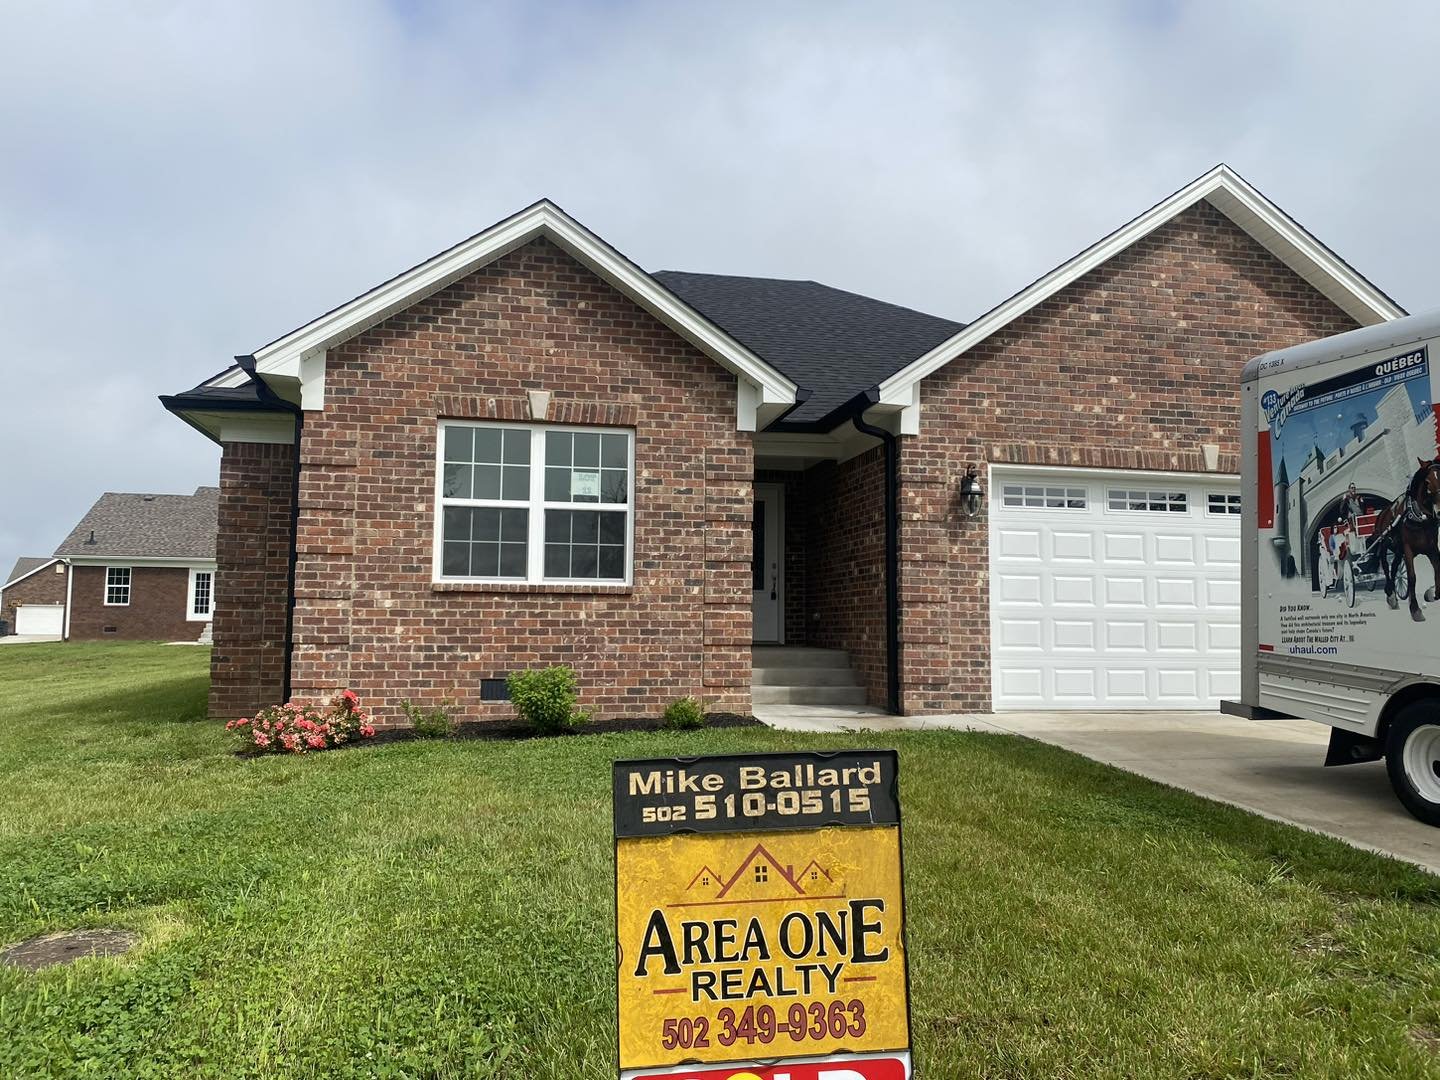 ‼️SOLD‼️SOLD‼️SOLD‼️SOLD‼️SOLD
Great New Construction home 🏡 SOLD at 316 Oak Grove Dr located in Oak Ridge Subdivision in Historic Bardstown, Ky. 

Thank you to our wonderful seller for choosing Area One Realty to get your  wonderful new home 🏡 SOL